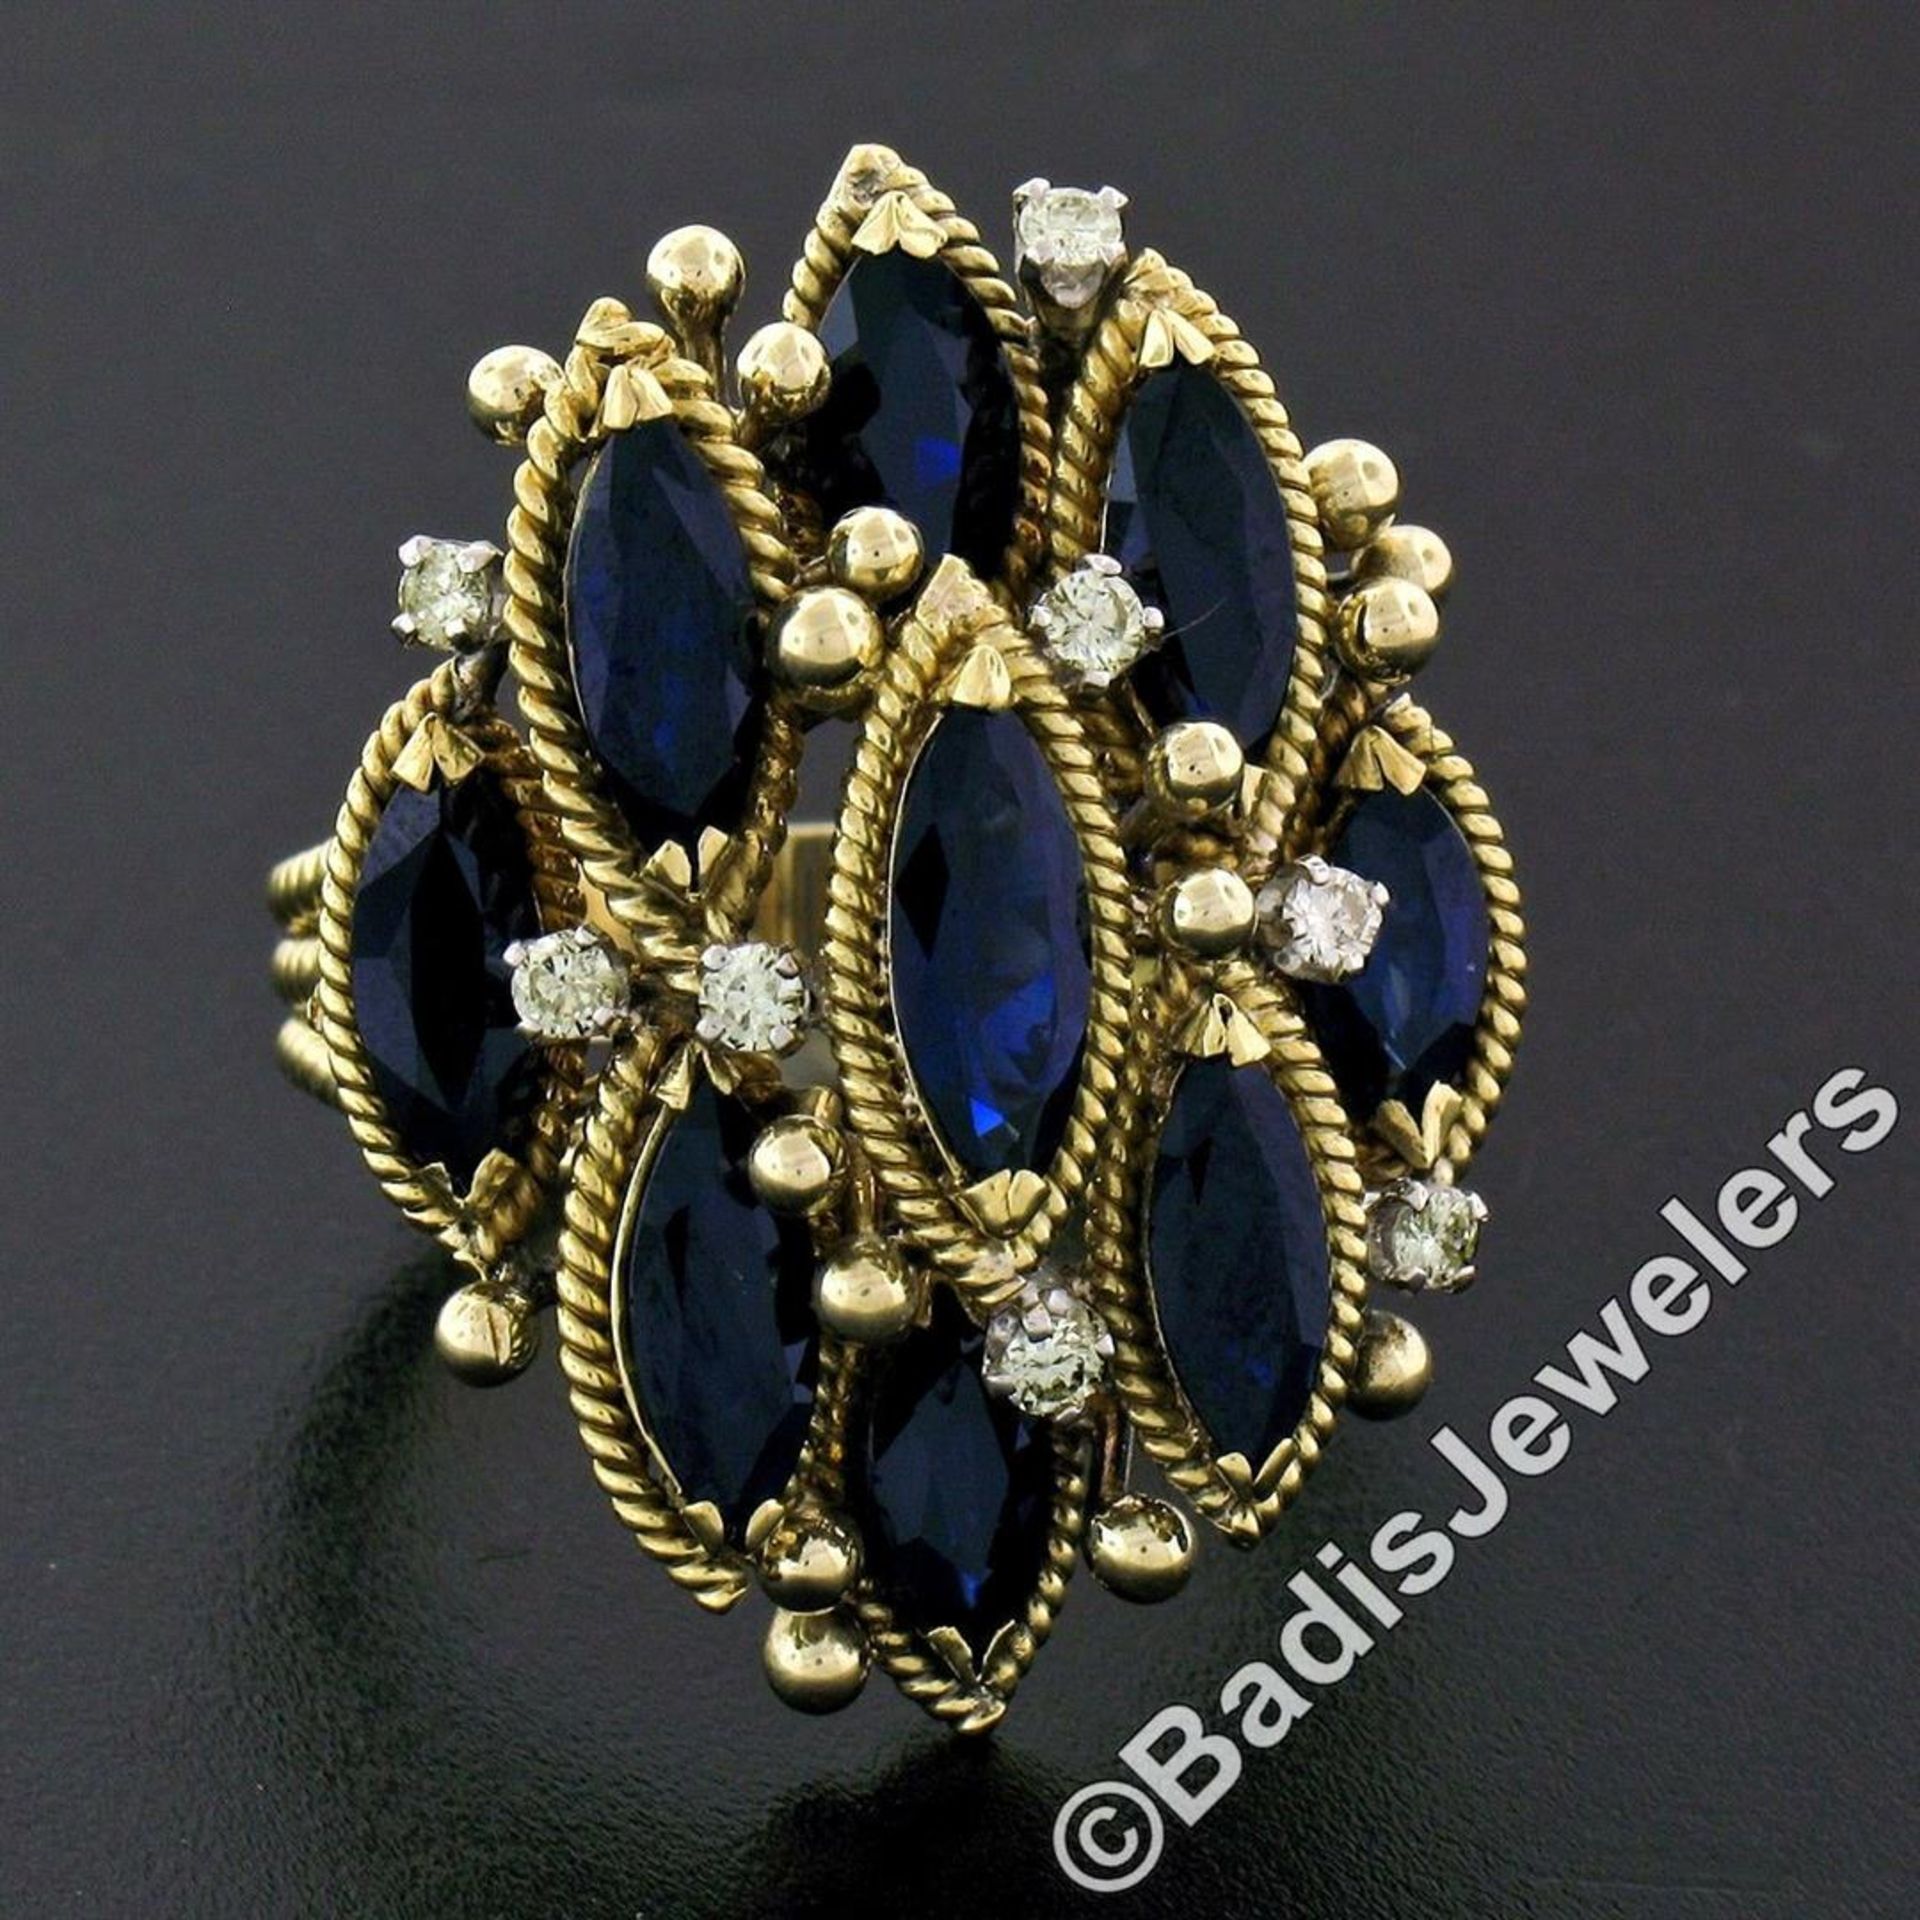 18kt Yellow Gold 7.37ctw Marquise Sapphire & Diamond Tiered Cocktail Ring - Image 2 of 9